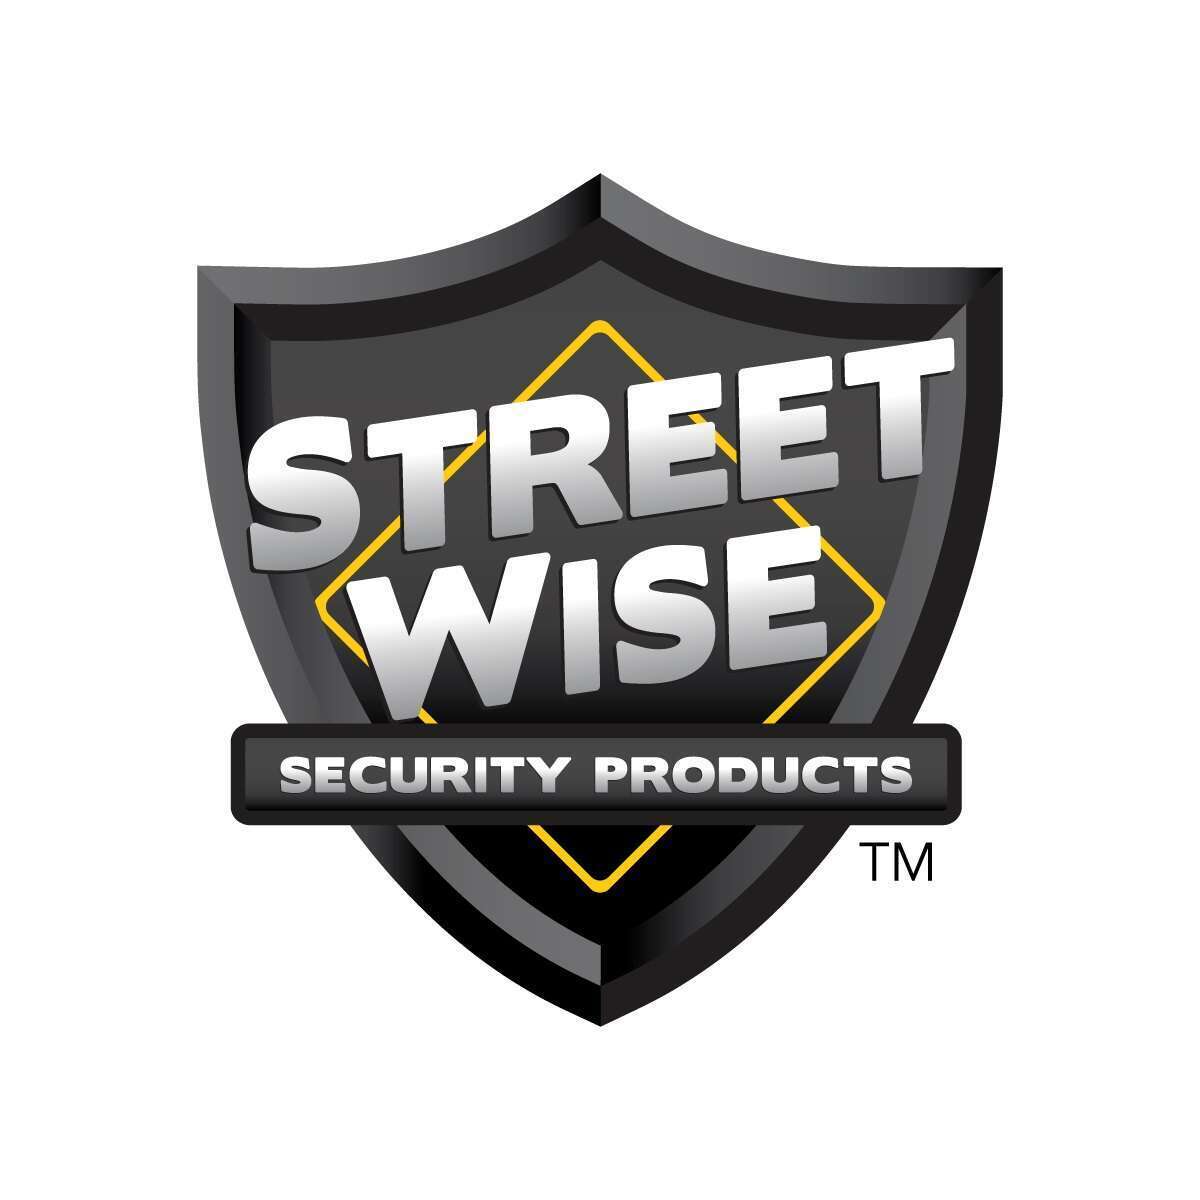 Street wise security products